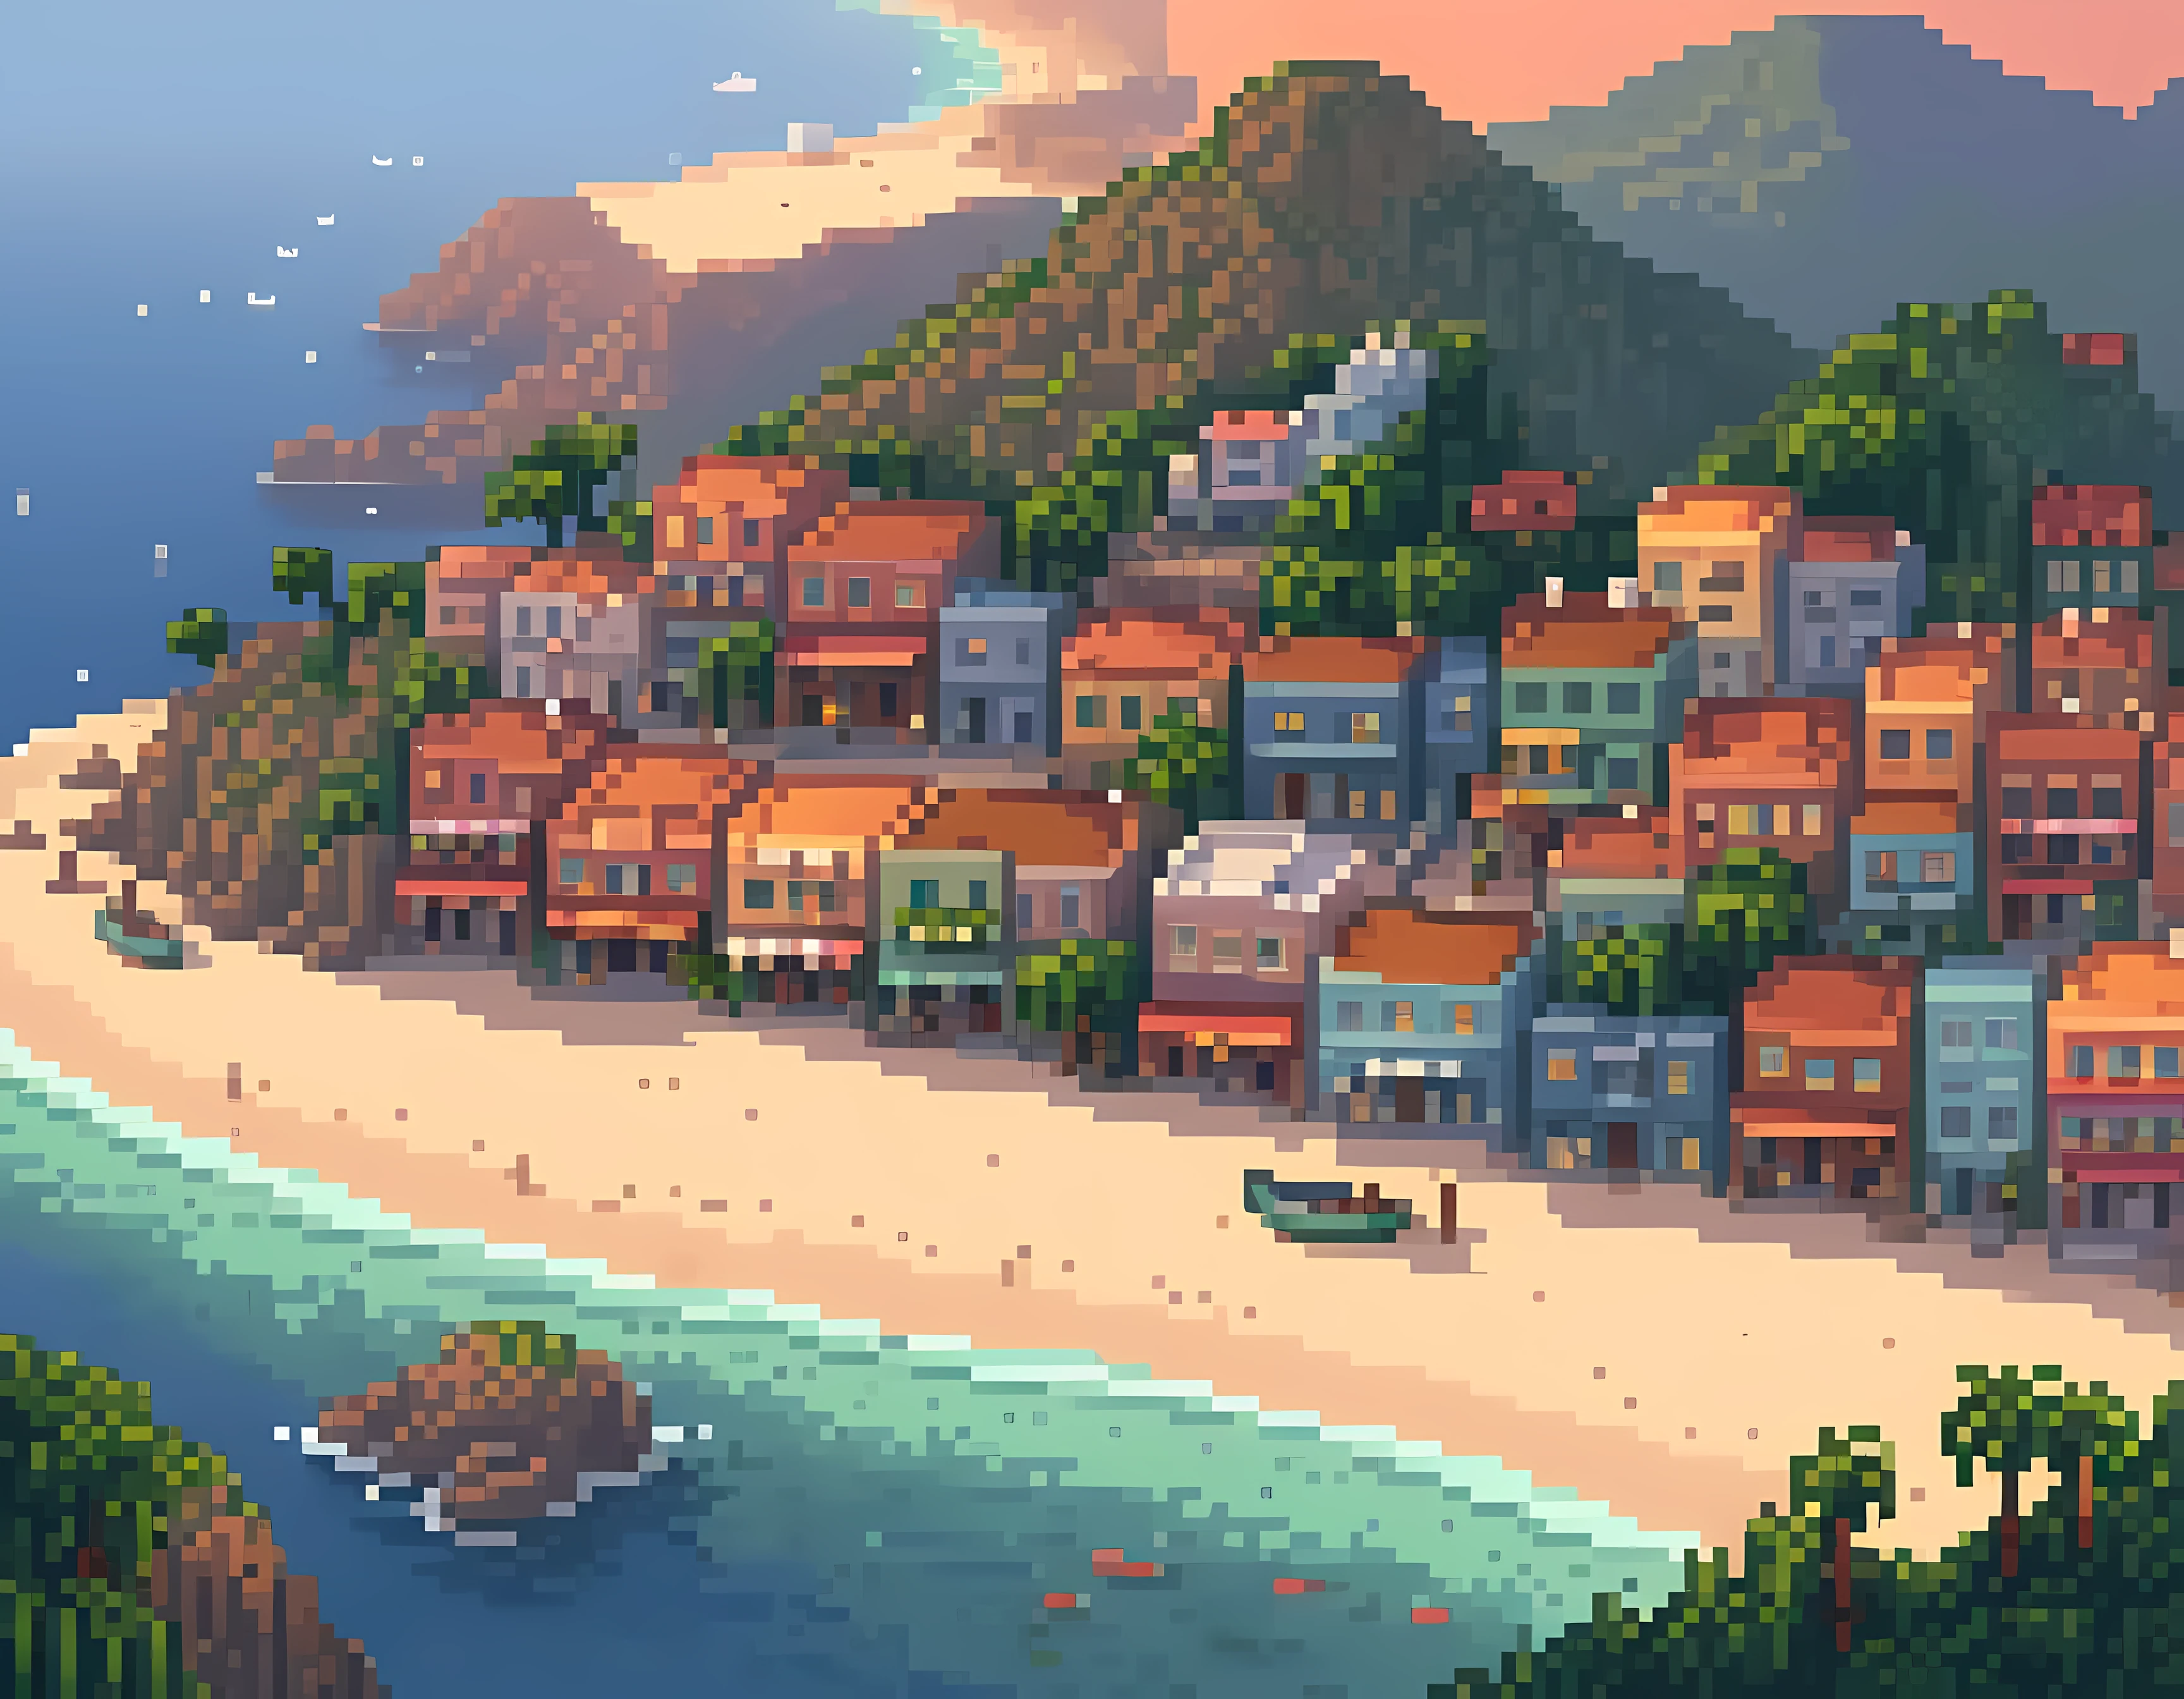 Pixel art, masterpiece in maximum 16K resolution, superb quality, a stunning ((aerial view)) of a coastal city nestled between mountains and the ocean, iconic landmarks, vibrant neighborhoods, golden hour lighting and atmospheric haze to create a sense of depth and dimension, intricate details of the buildings and streets, harmonious color scheme. | ((More_Detail))